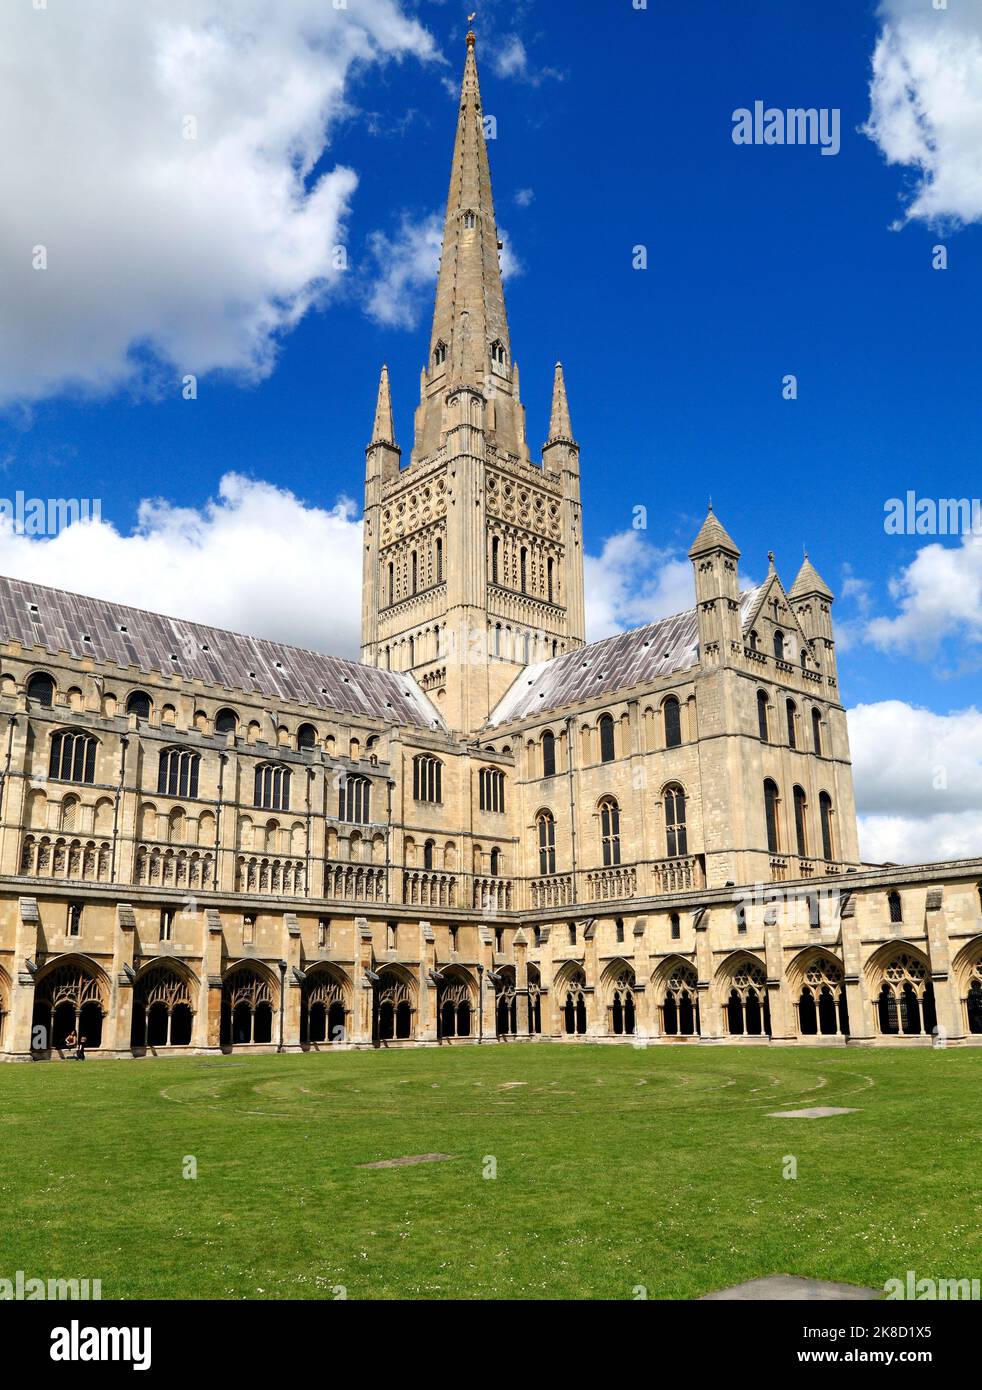 Norwich Cathedral, Spire , Nave, Transept and Cloisters, Medieval architecture, English cathedrals, Norfolk, England, UK Stock Photo